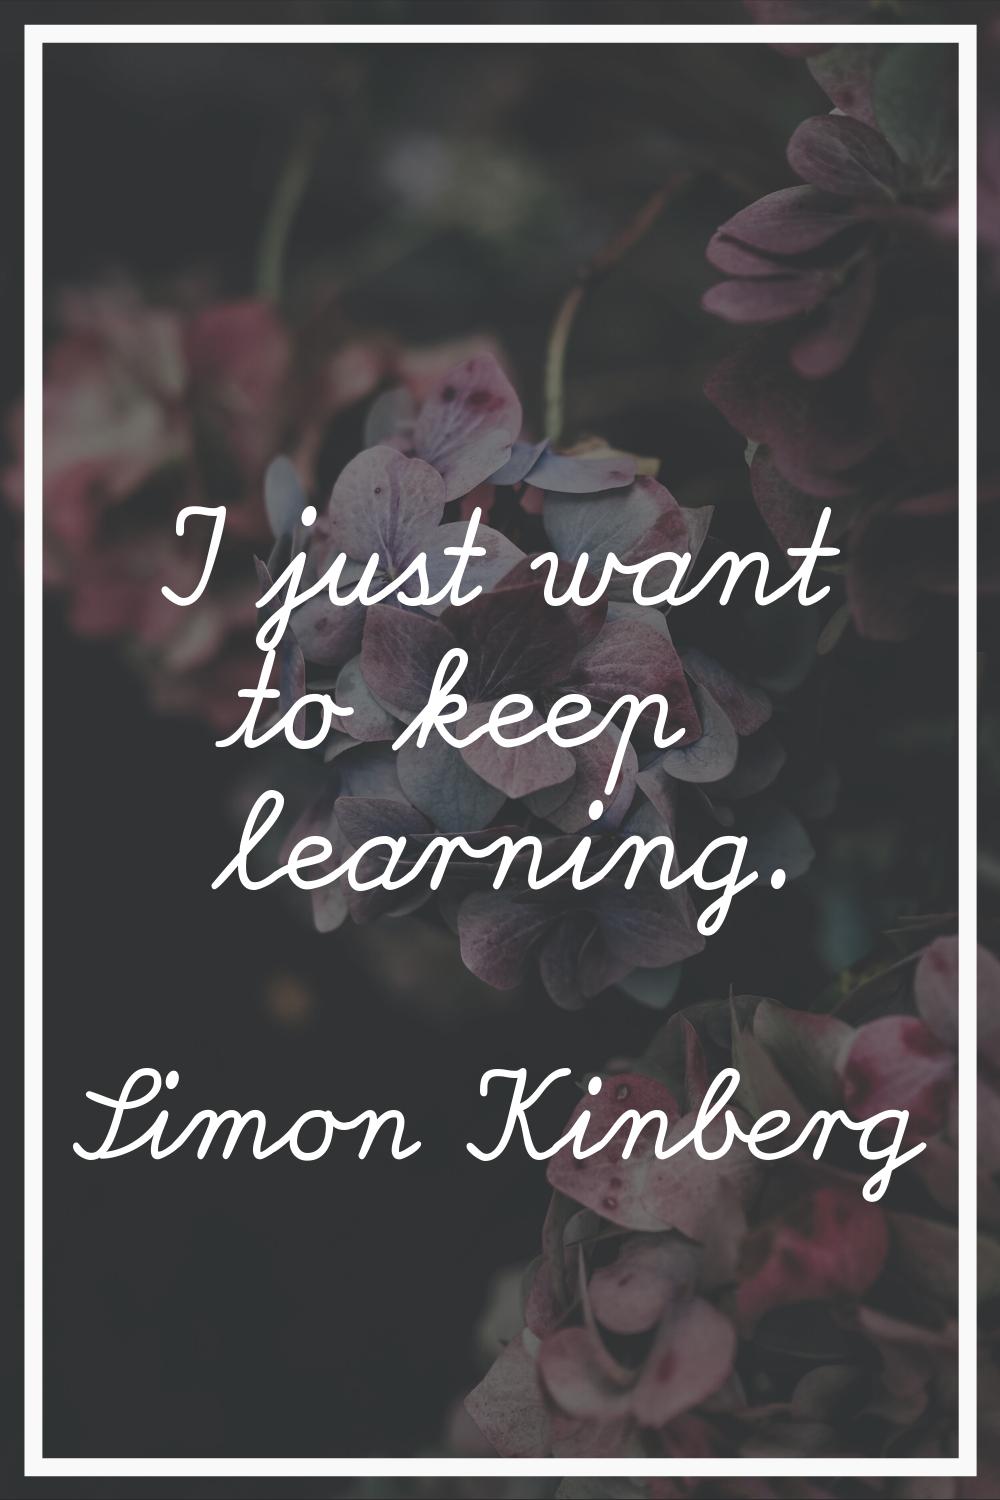 I just want to keep learning.